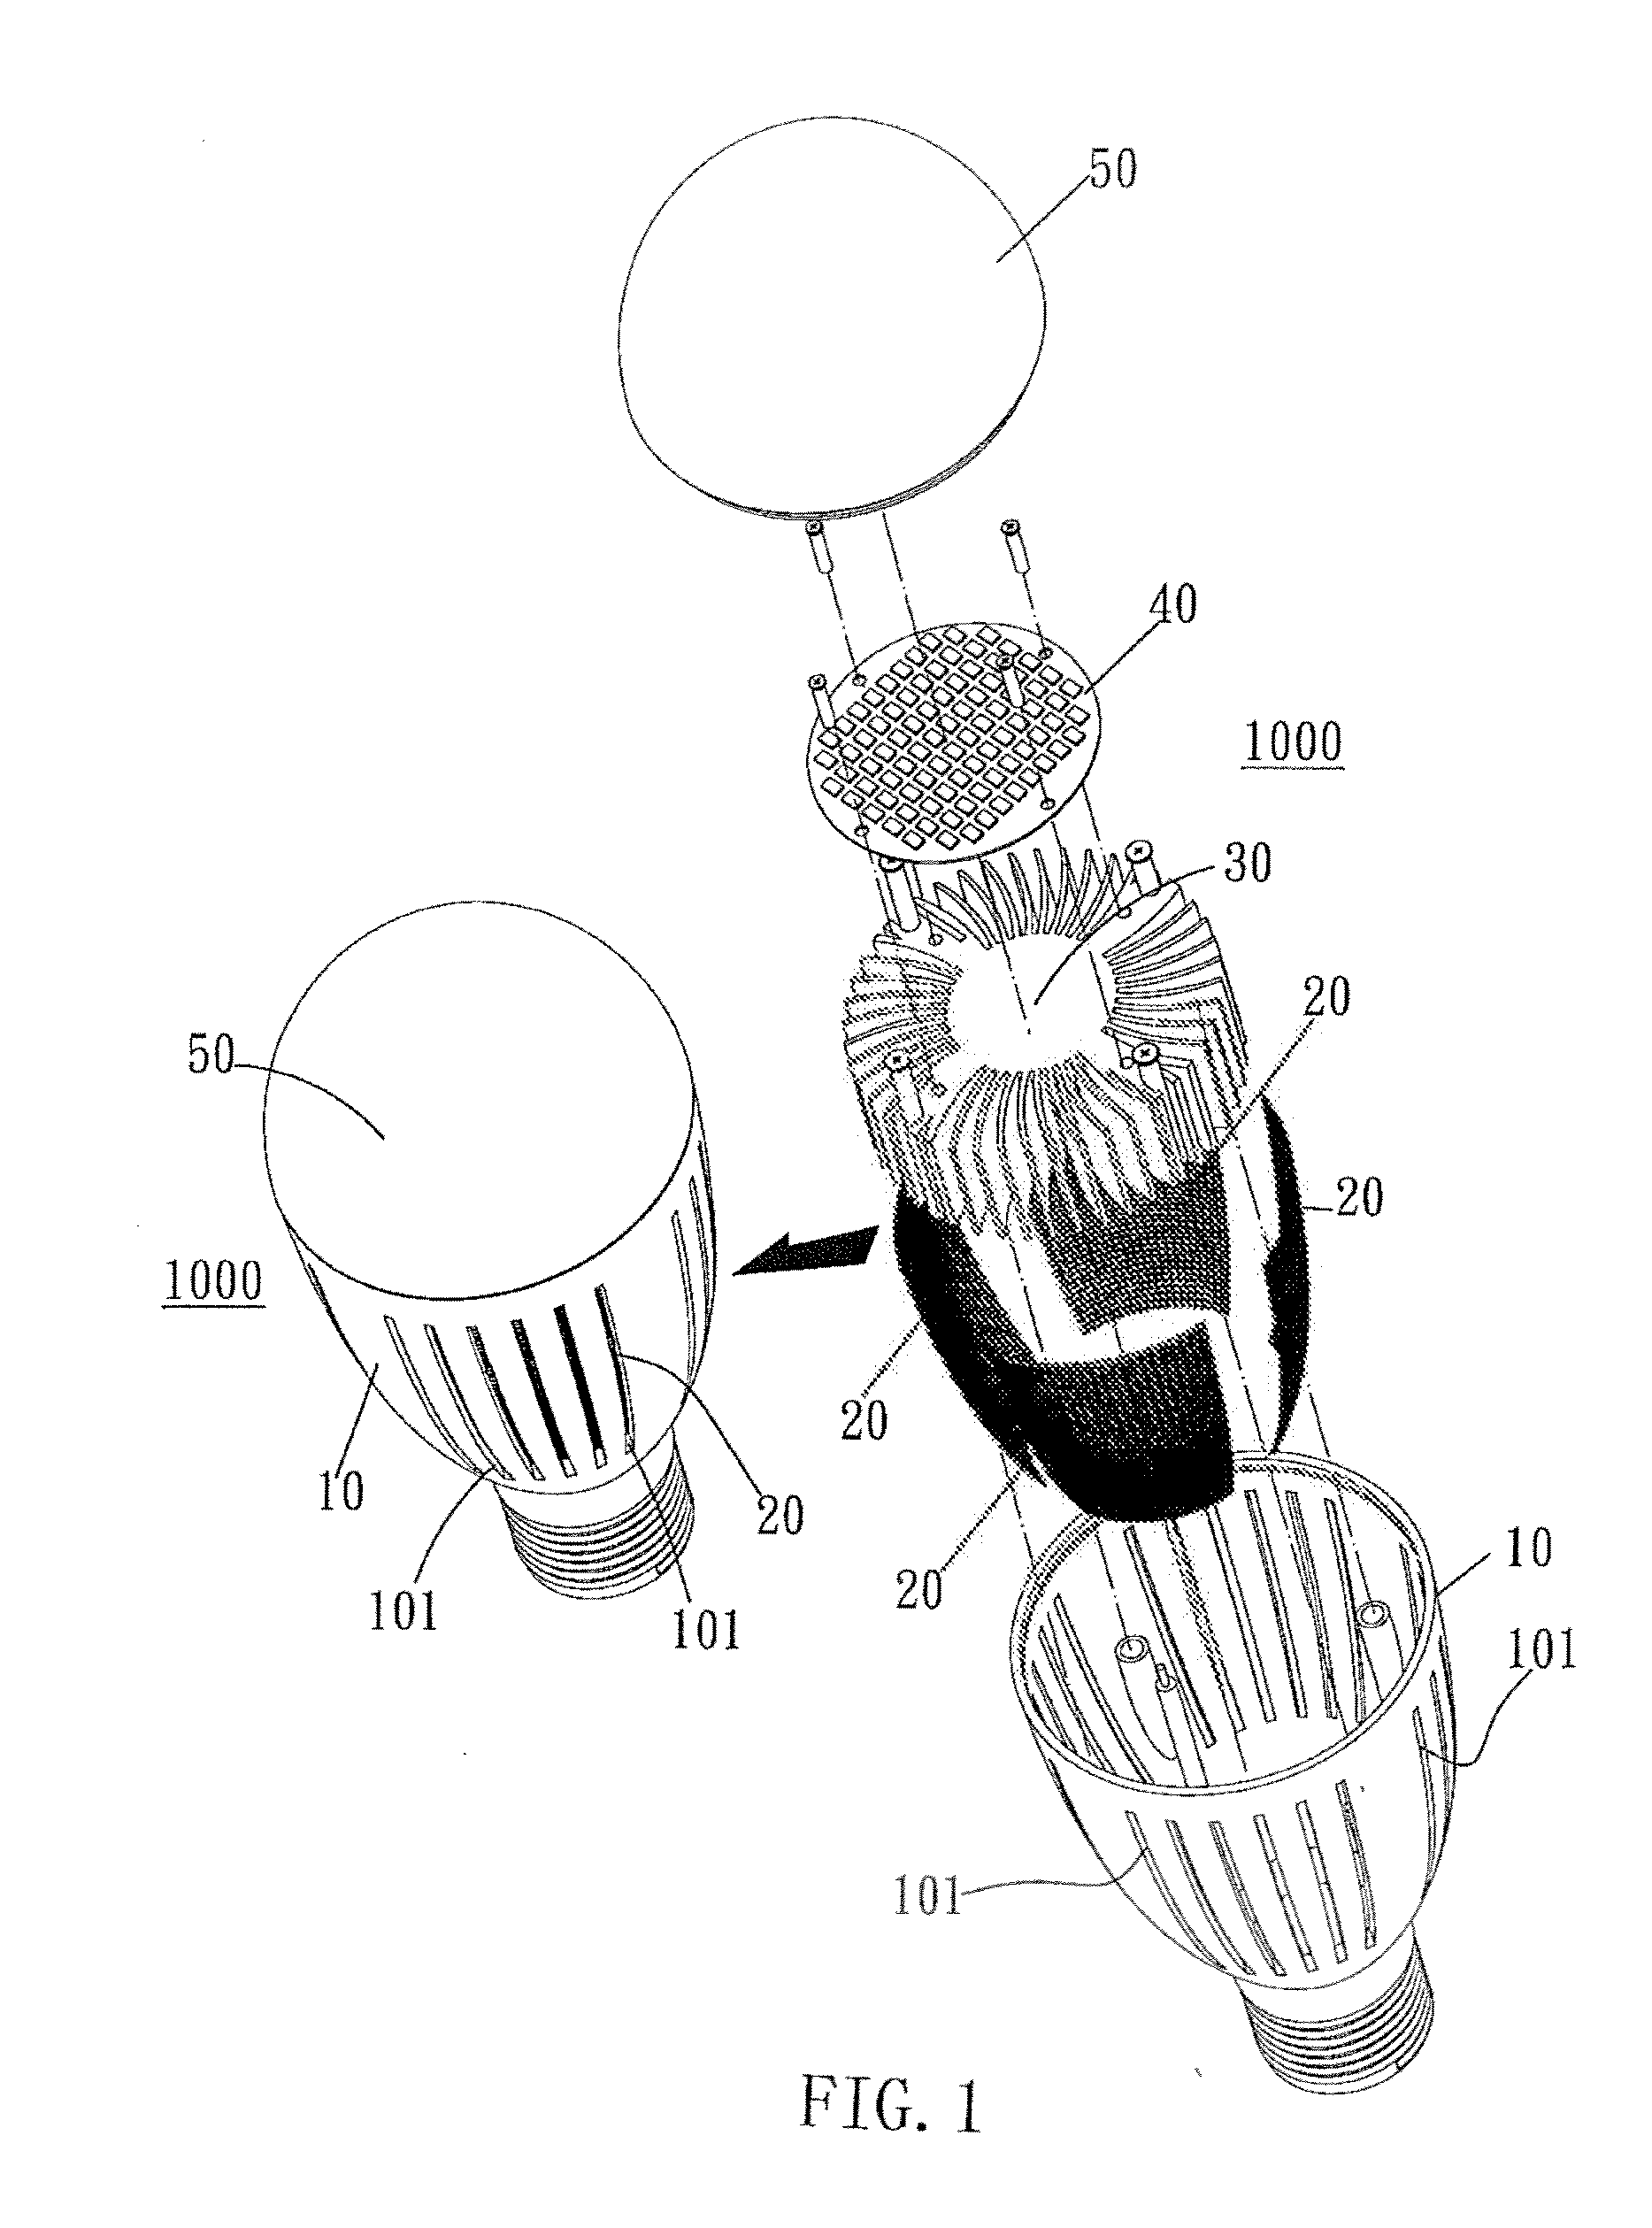 LED lightbulb with improved gain structure